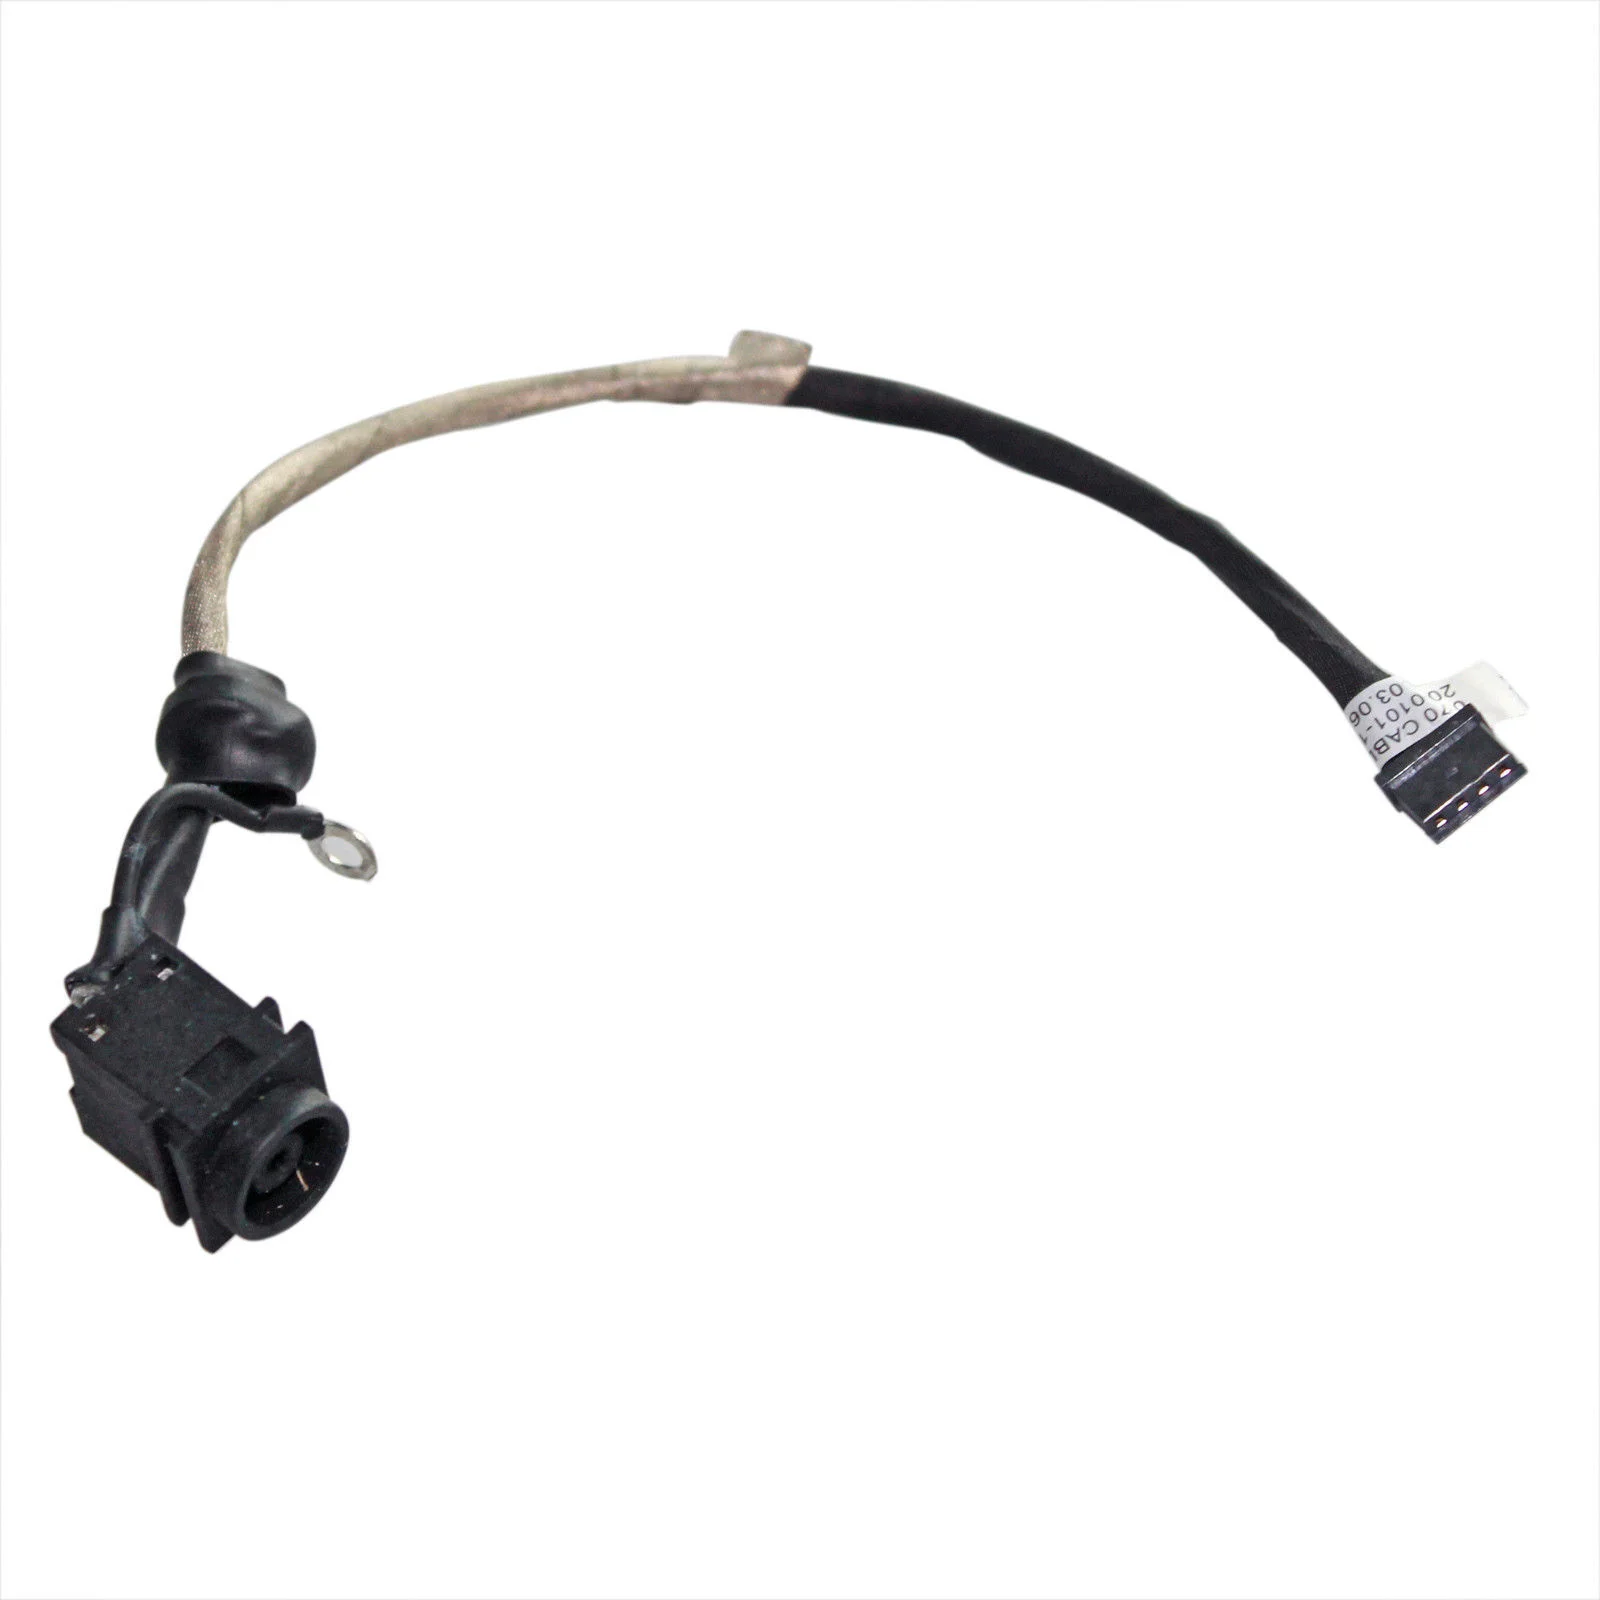 For SONY VAIO PCG-71211L PCG-71212L PCG-71213L DC In Power Jack Cable Charging Port Connector quying laptop lcd screen for sony pcg 71212l 15 6 inch fhd 1920x1080 40pin tk